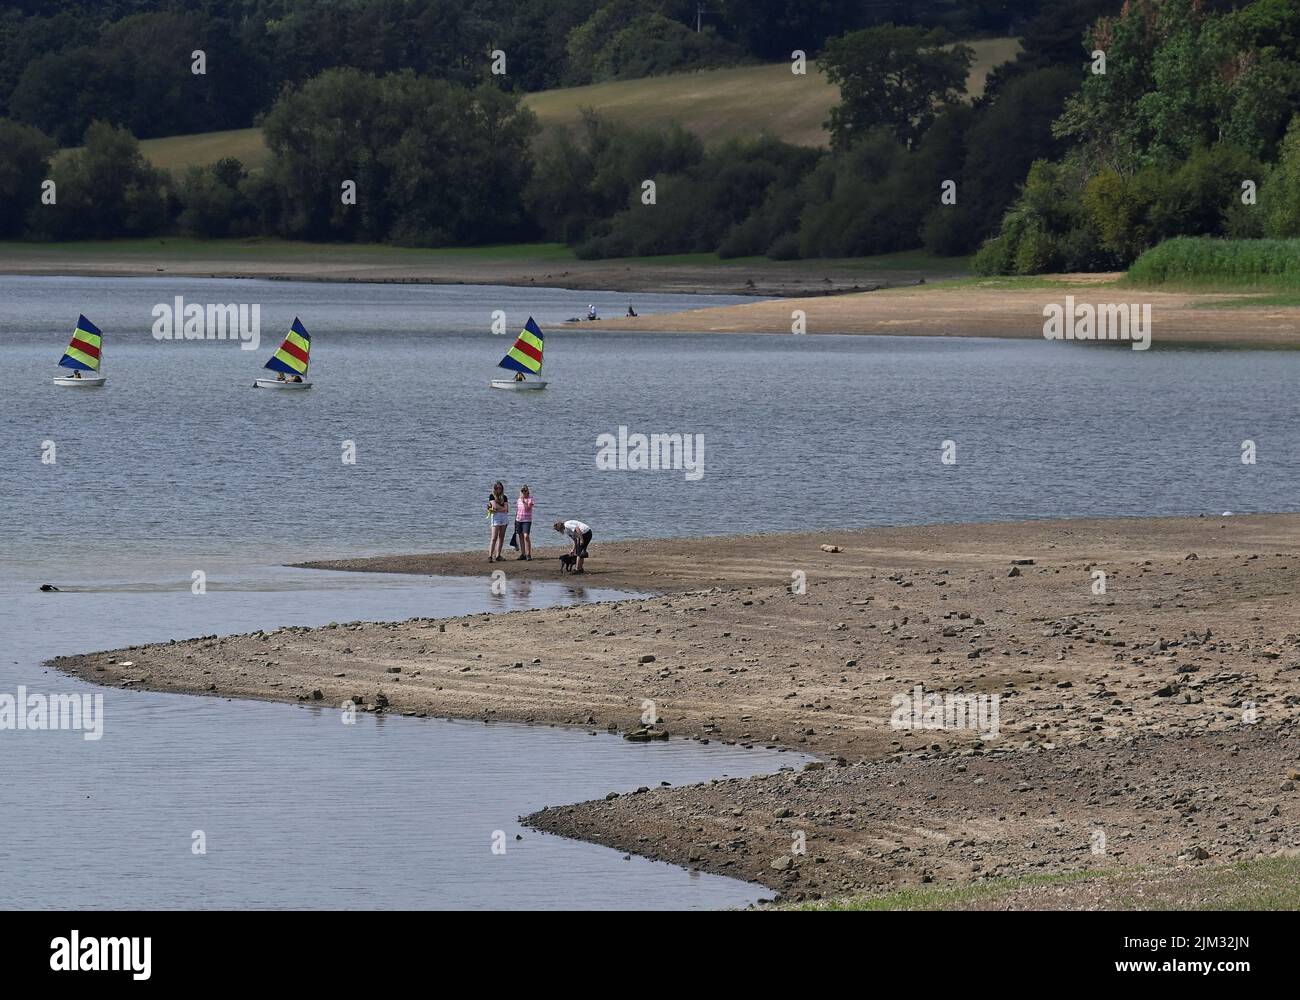 People walk along the shoreline as reduced water levels are seen at Ardingly Reservoir, ahead of regional restrictions over water usage being implemented in the hot and dry weather, Ardingly, southern Britain, August 4, 2022.  REUTERS/Toby Melville Stock Photo